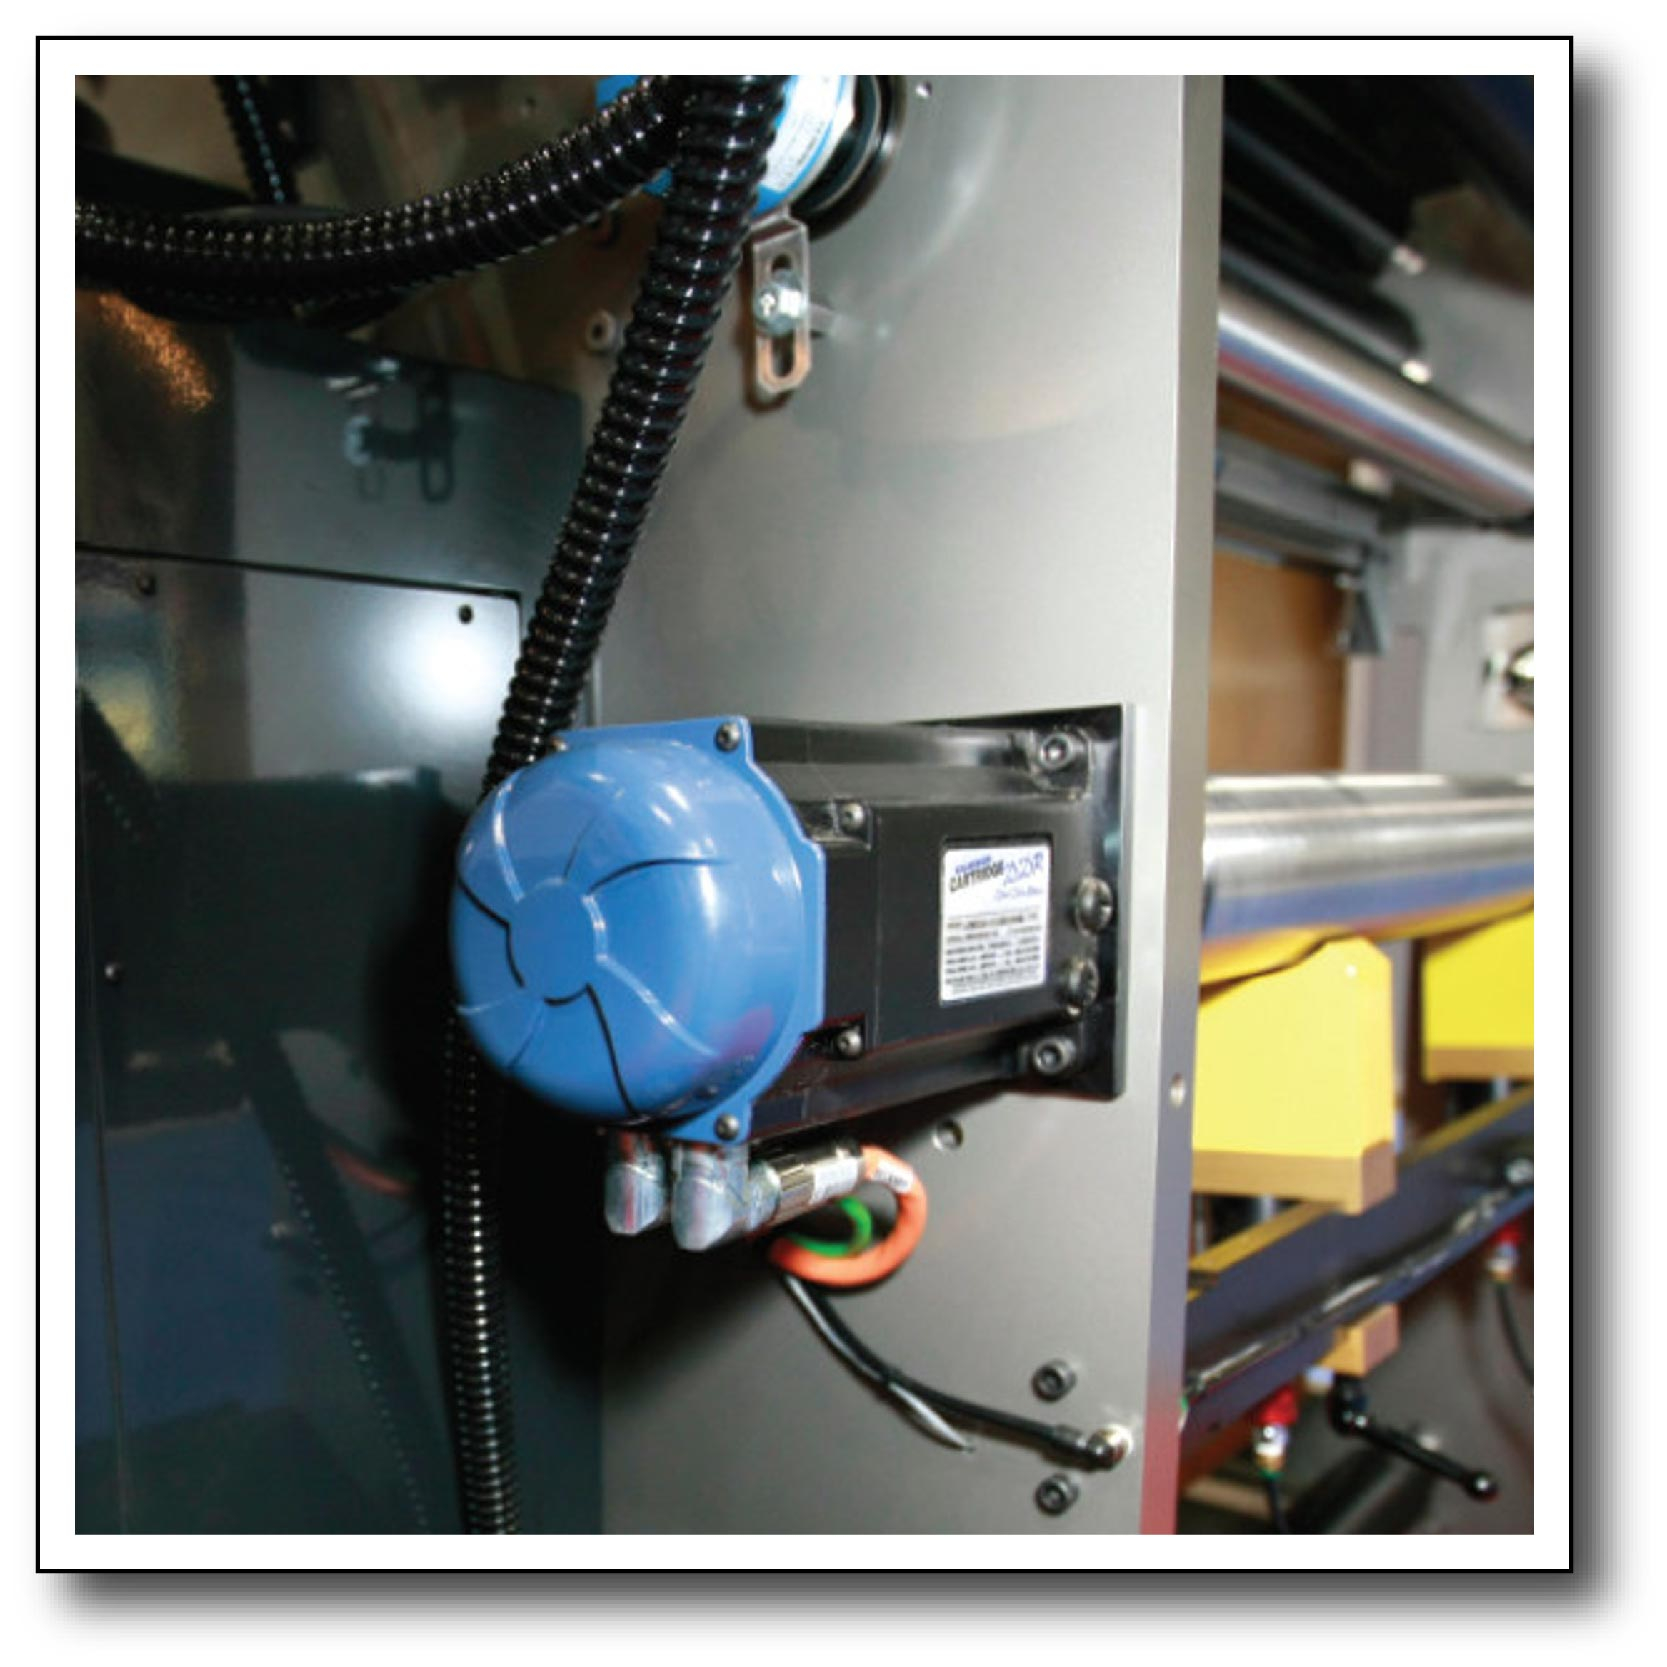 Why use Kollmorgen Motion Control Systems